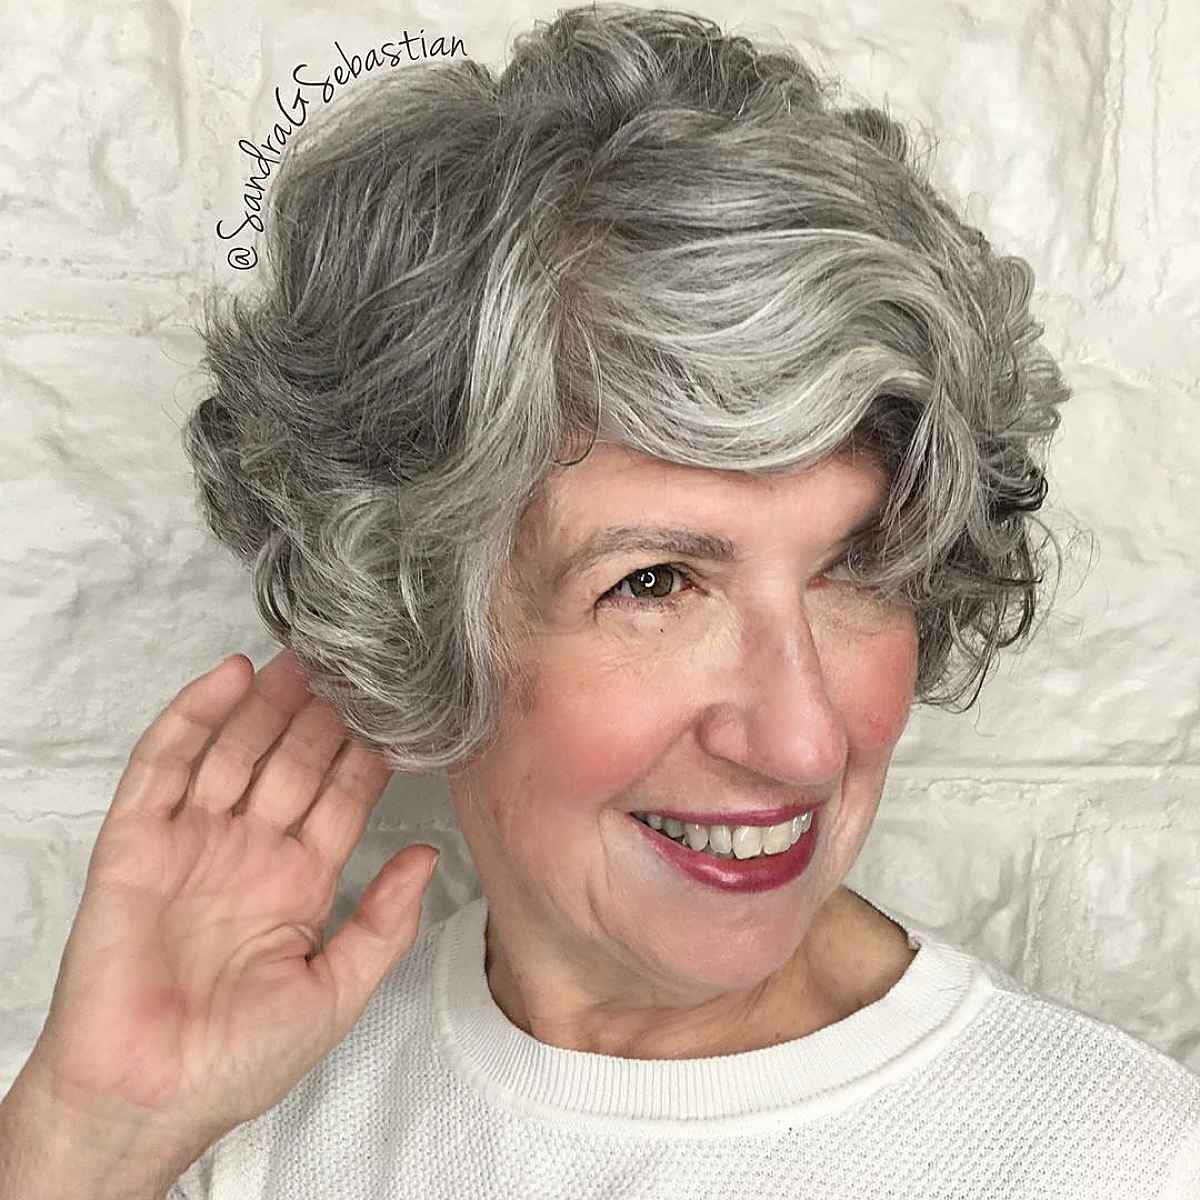 16 Stylish Bob Haircuts for Women Over 70 Who Want a Fashionable Look